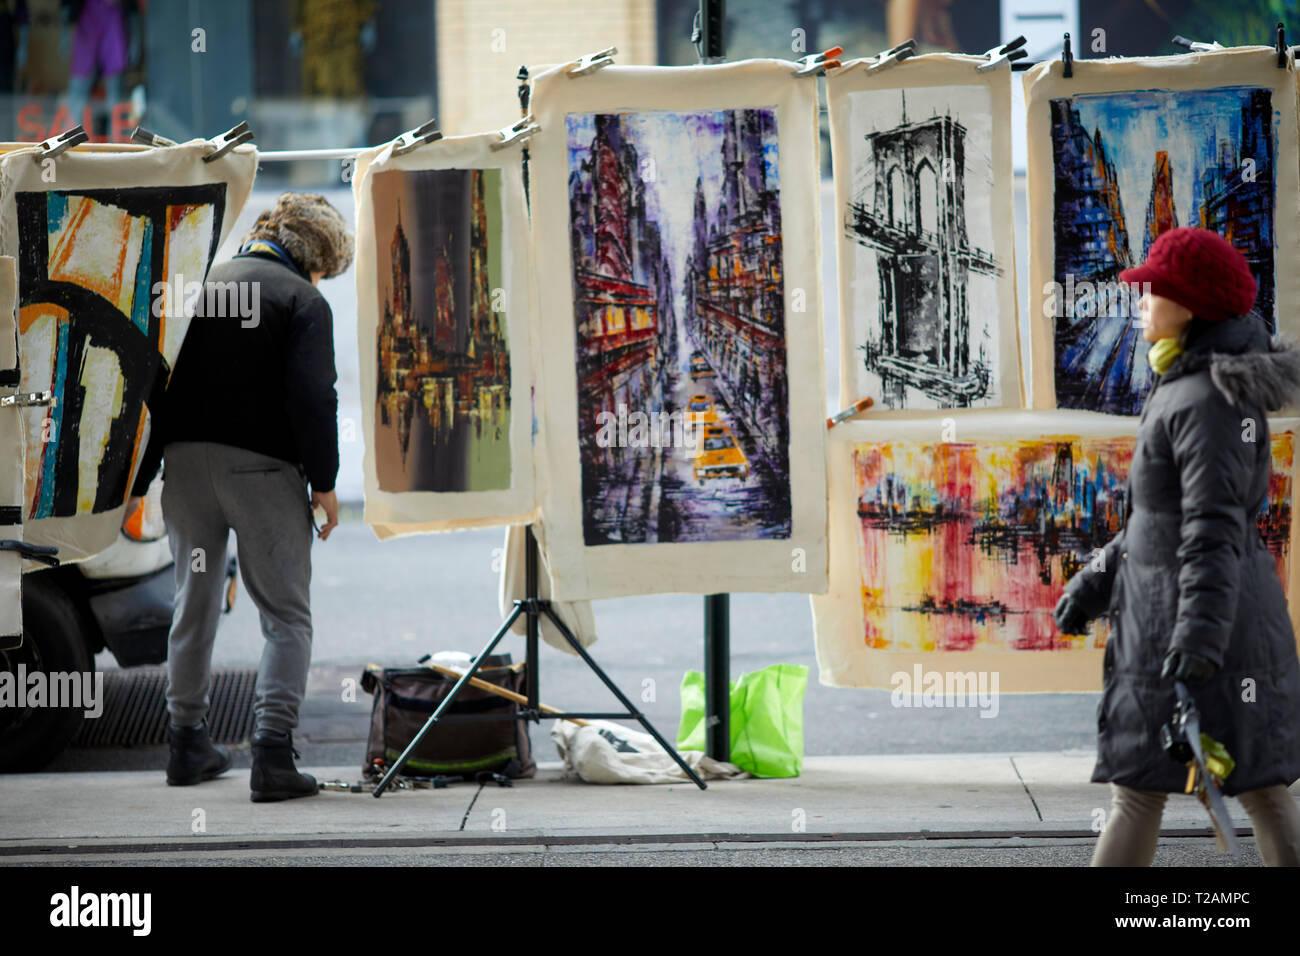 Canvas artwork for sale by street traders at the tourist destination High Line Stock Photo